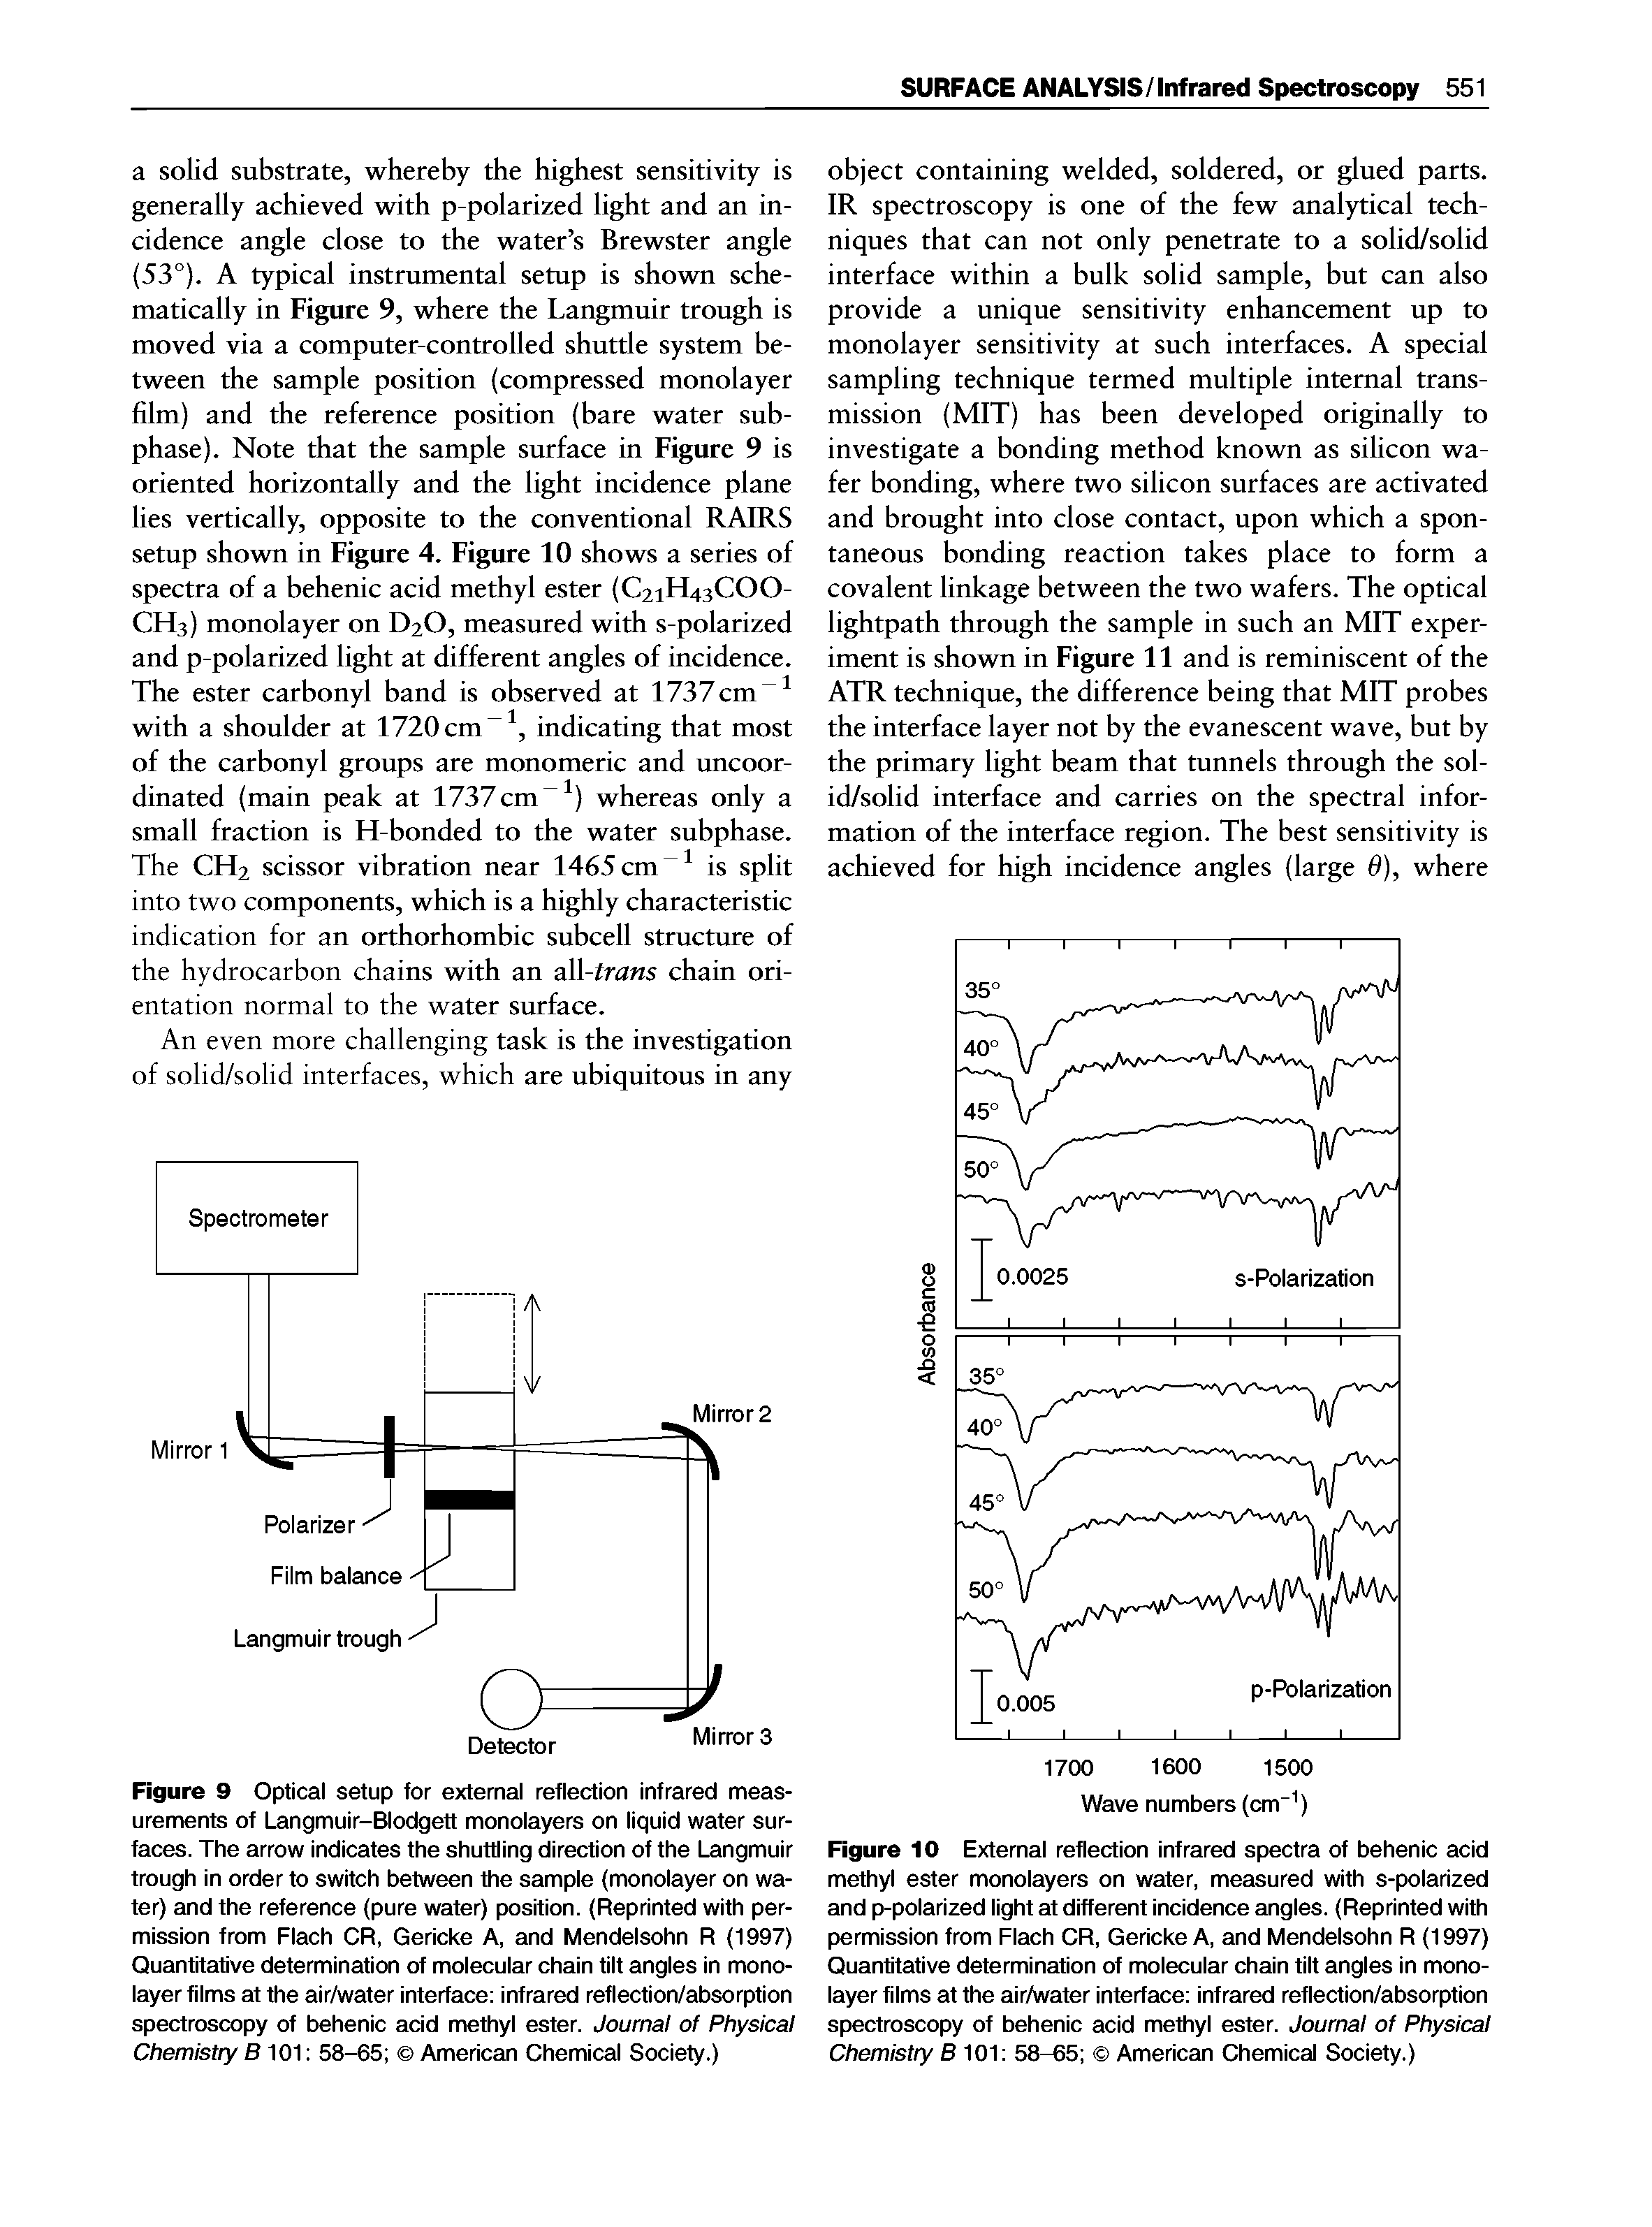 Figure 10 External reflection infrared spectra of behenic acid methyl ester monolayers on water, measured with s-polarized and p-polarized light at different incidence angles. (Reprinted with permission from Flach CR, Gericke A, and Mendelsohn R (1997) Quantitative determination of molecular chain tilt angles in mono-layer films at the air/water interface infrared reflection/absorption spectroscopy of behenic acid methyl ester. Journal of Physical Chemistry B101 58-65 American Chemical Society.)...